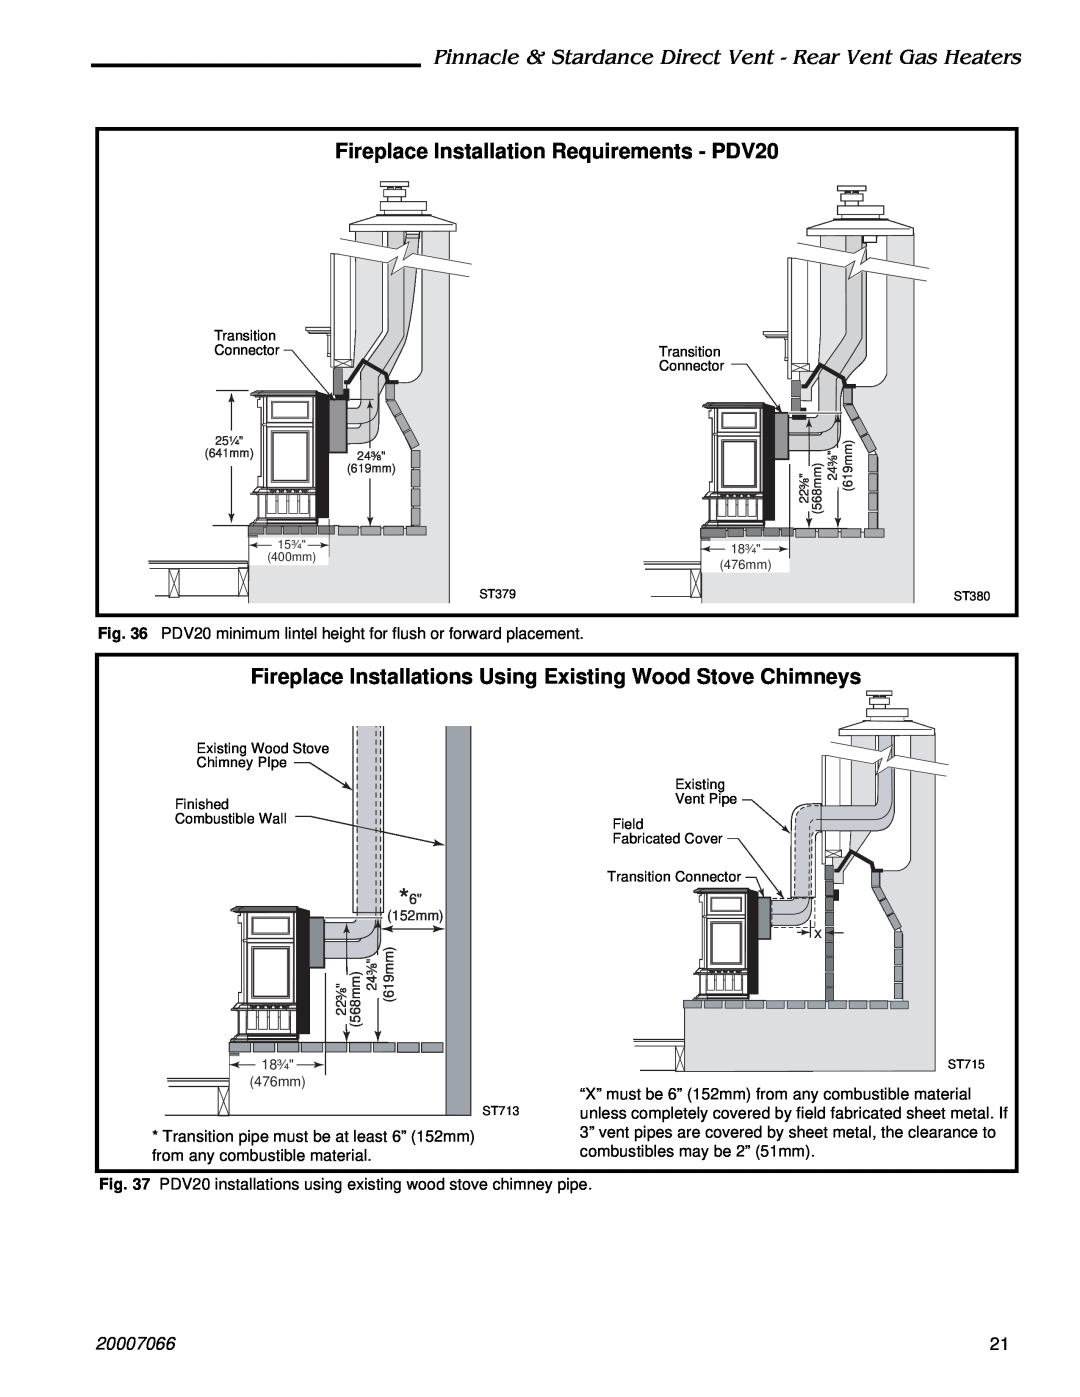 Vermont Casting 3960 Fireplace Installation Requirements - PDV20, Pinnacle & Stardance Direct Vent - Rear Vent Gas Heaters 